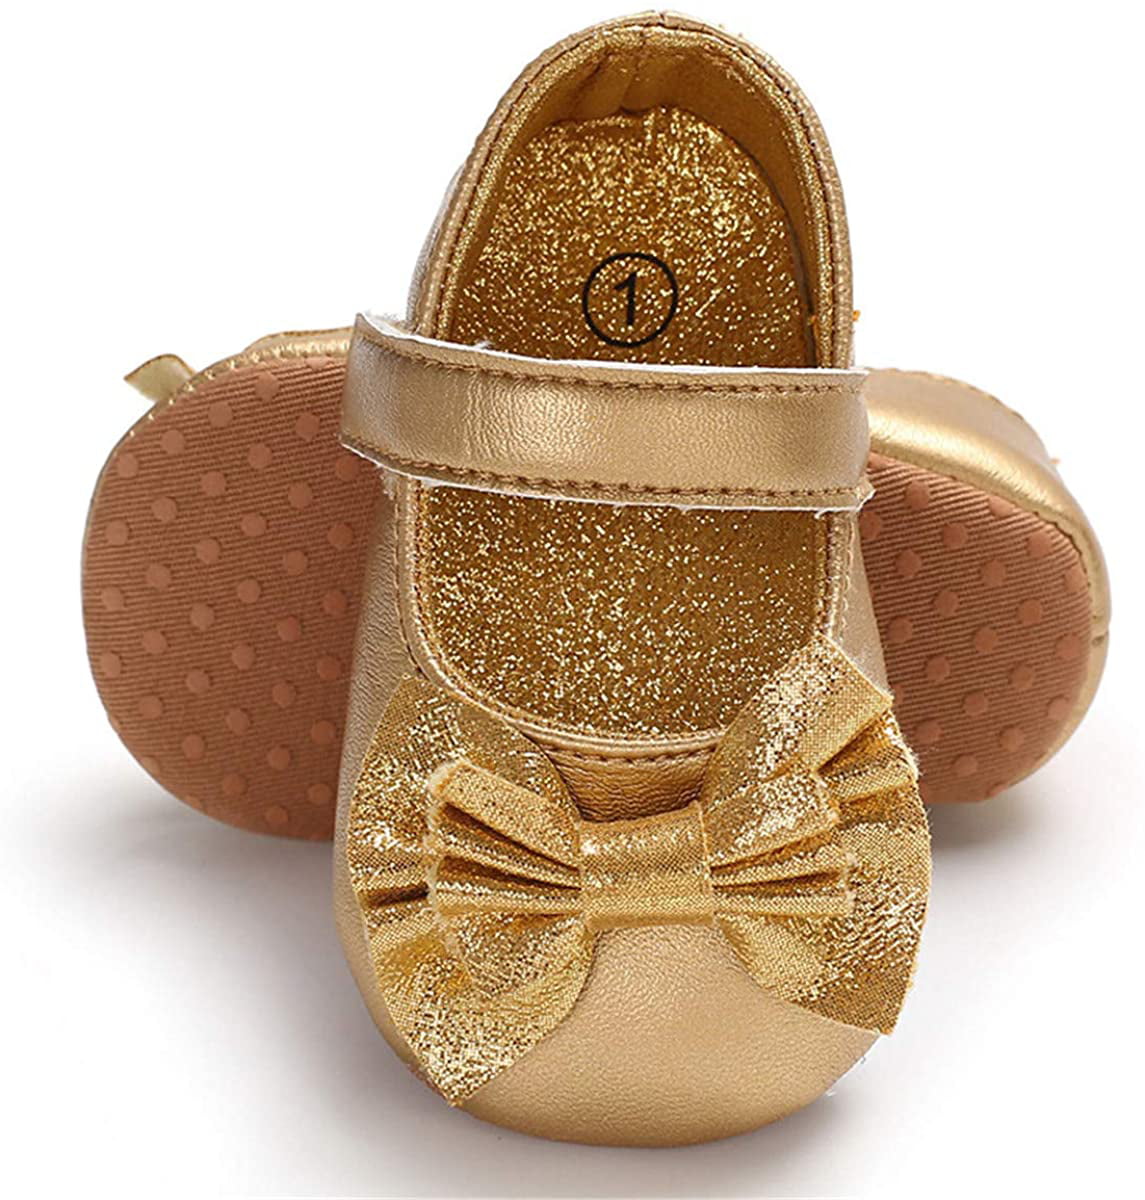 BFEERgirl Baby Girls Bowknot Shoes Soft Sole Princess Mary Jane Flat Shoes for Infant Toddler 